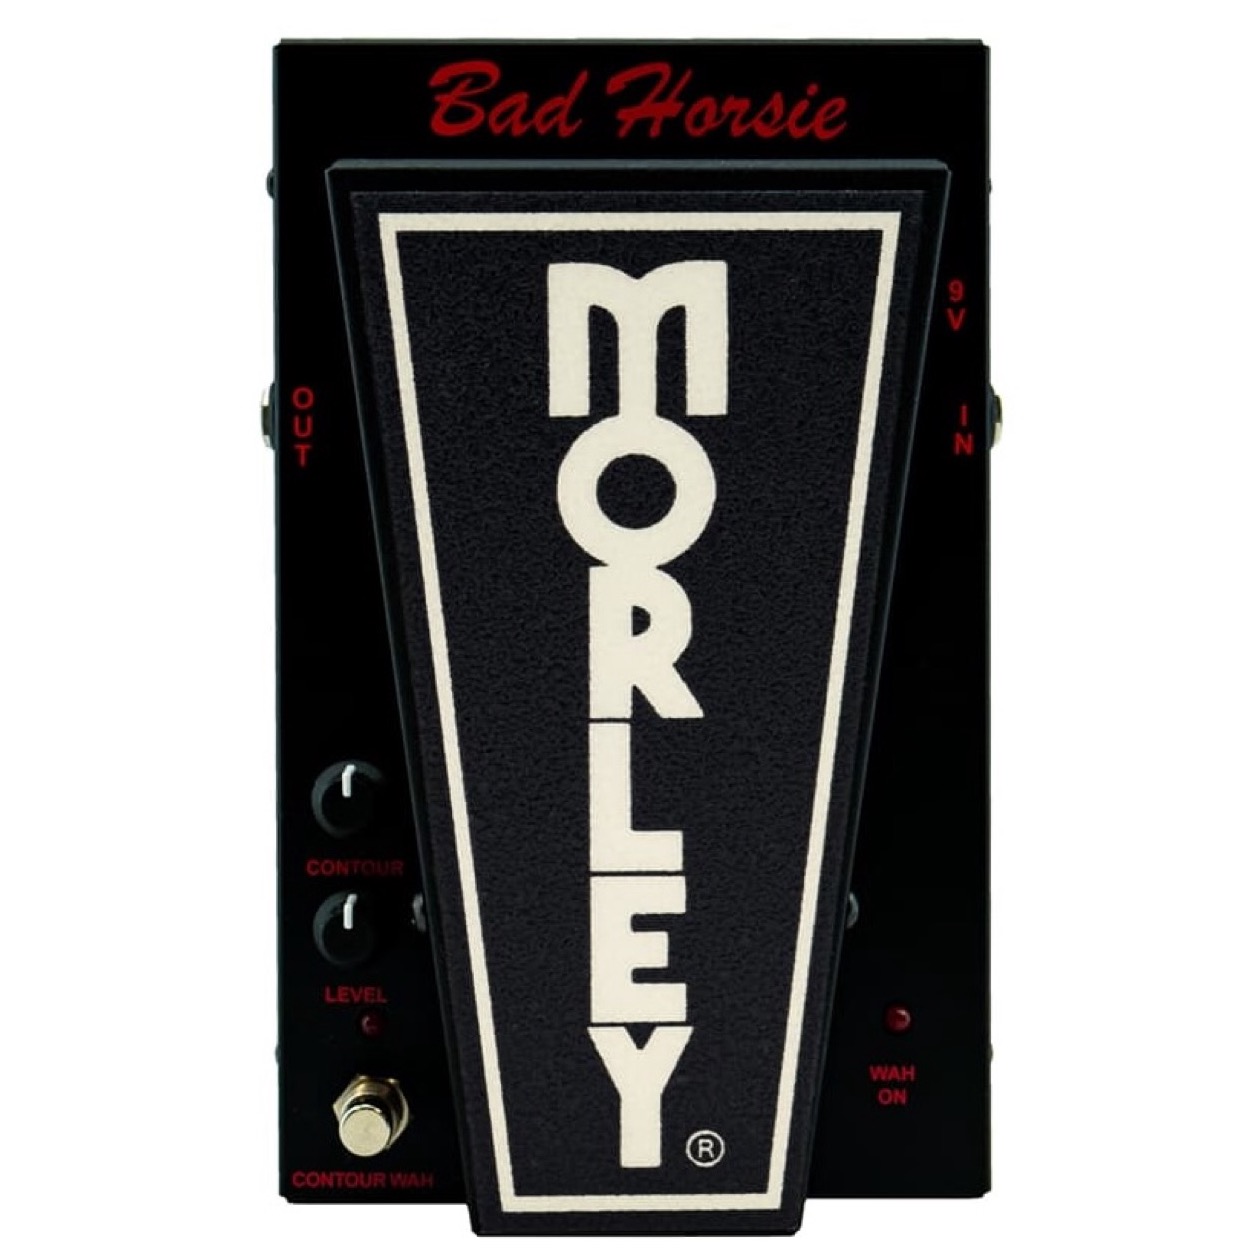 Morley BH 2 / BH2 Bad Horsie Classic Size Exclusief Adapter